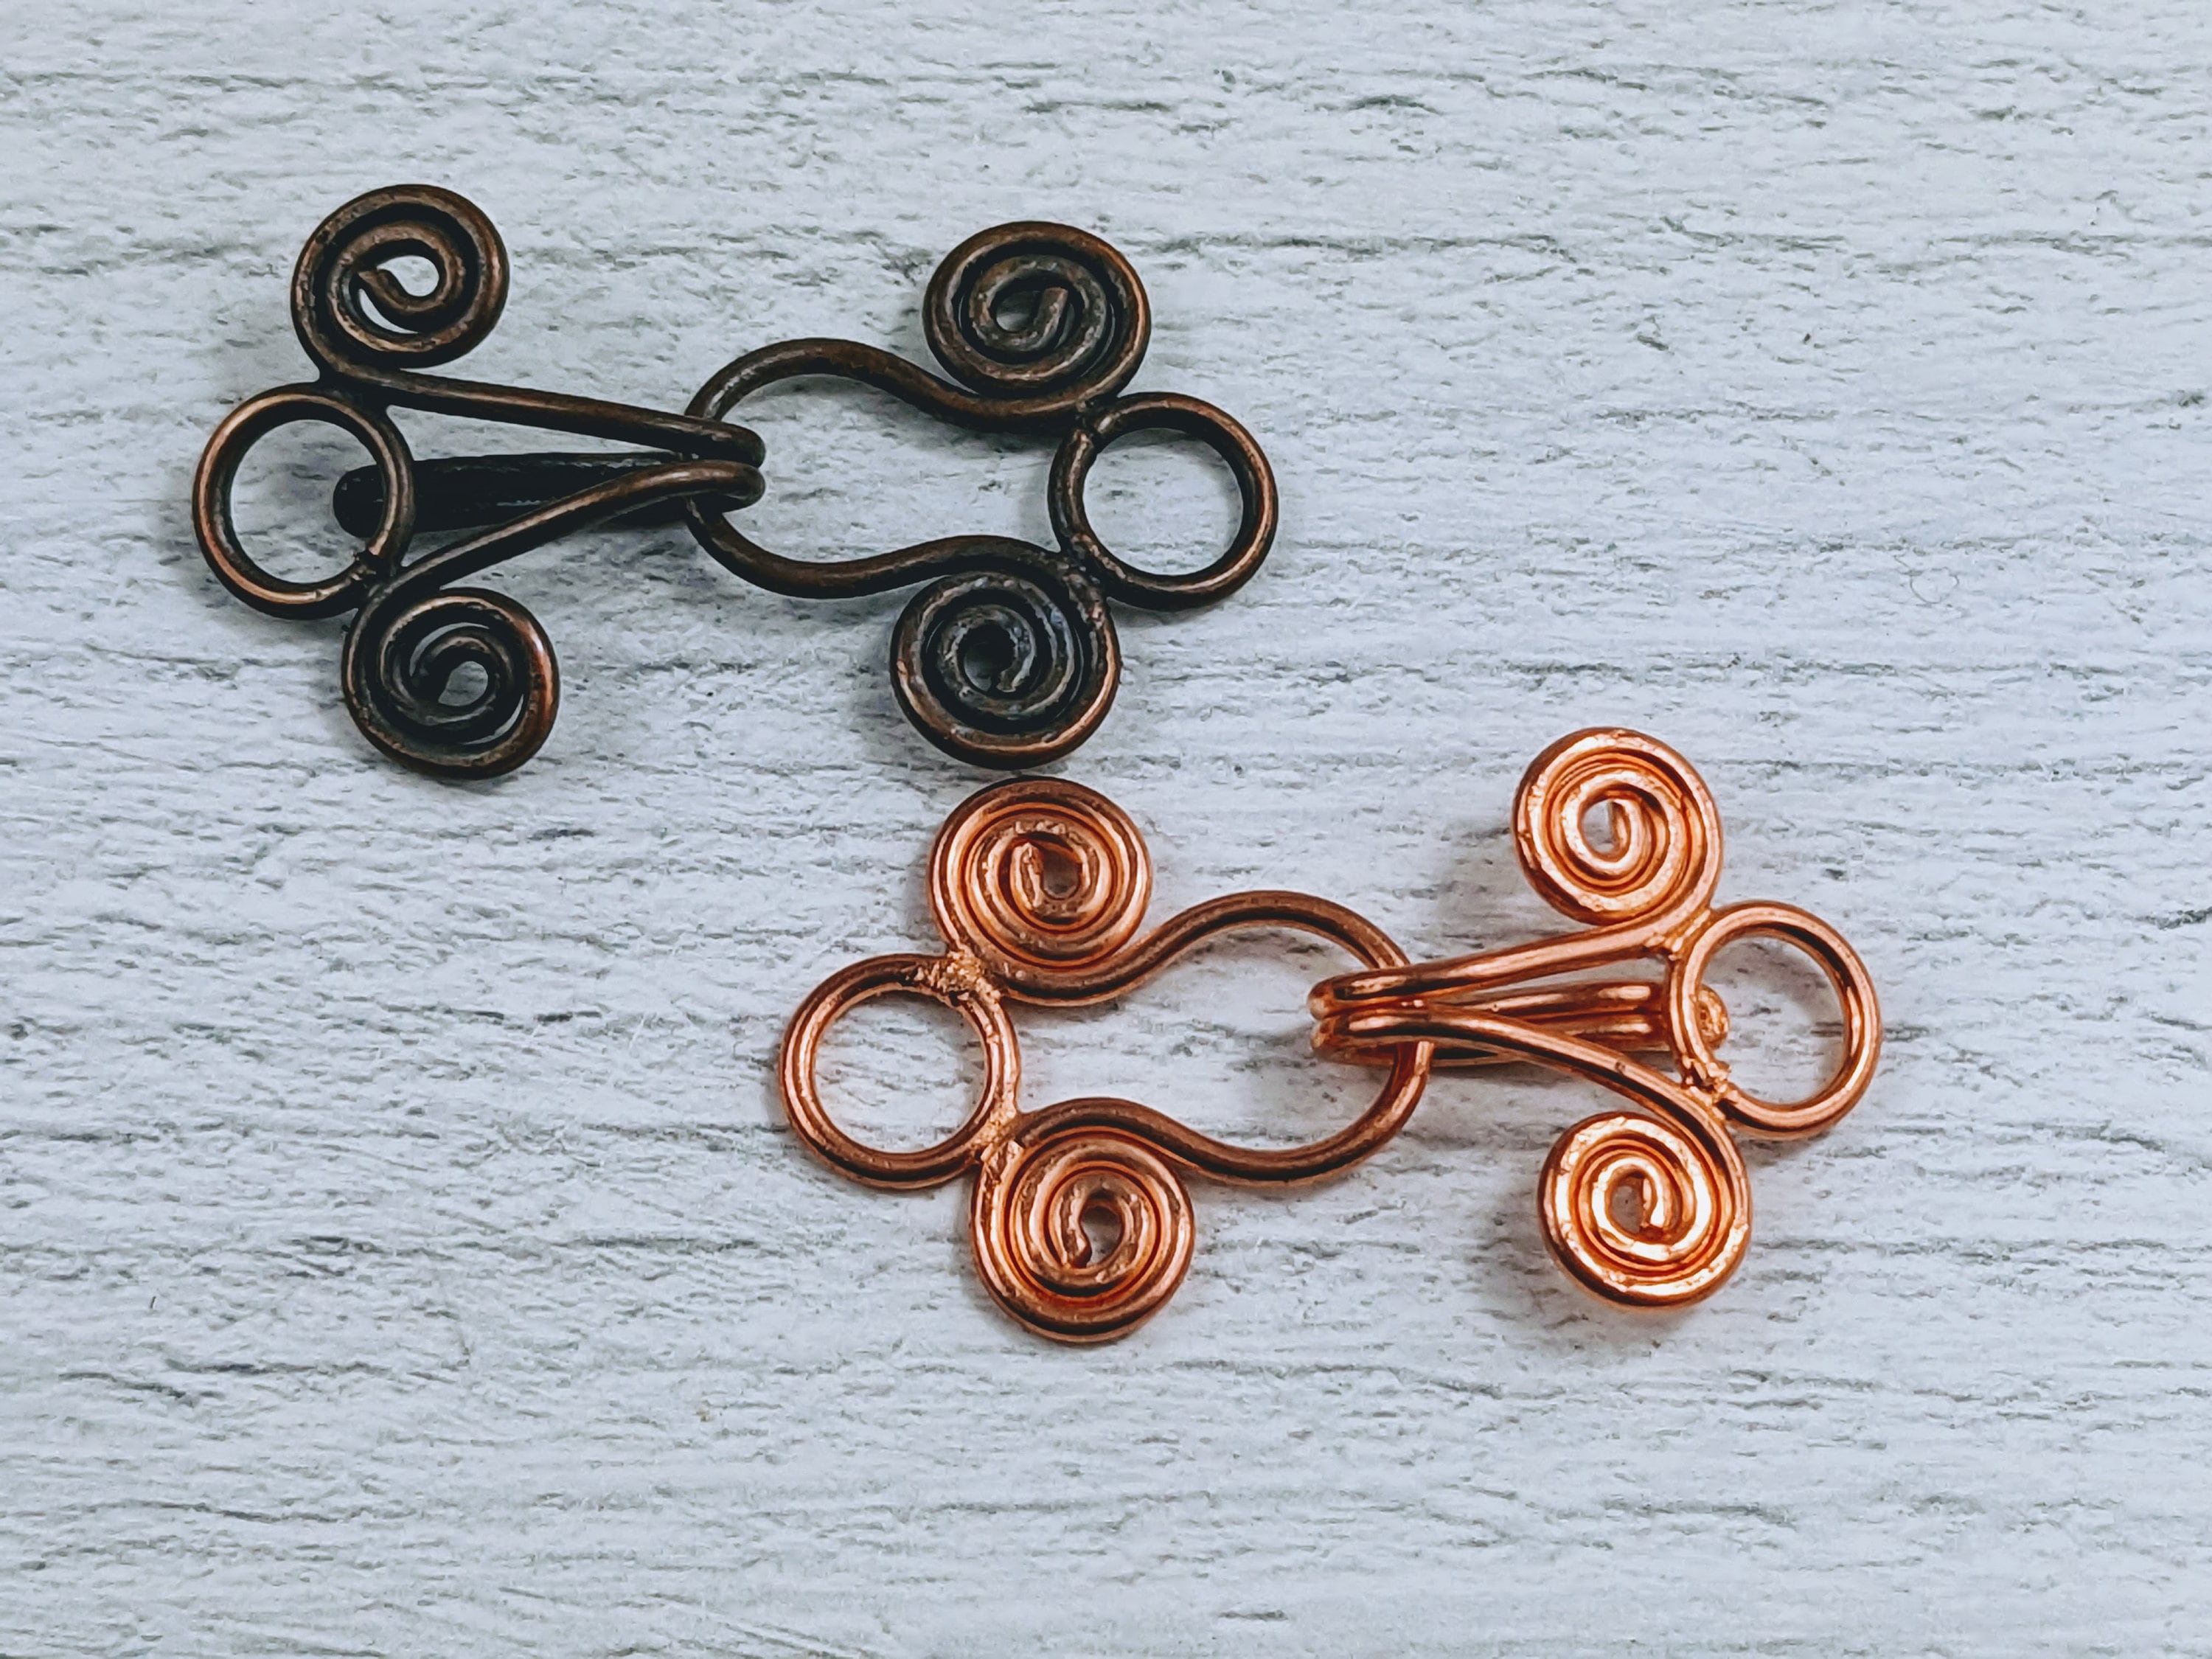 Large Genuine Copper Spiral Hook Clasp, Bright or Patina Finish, Antiqued,  45x20mm -  Norway